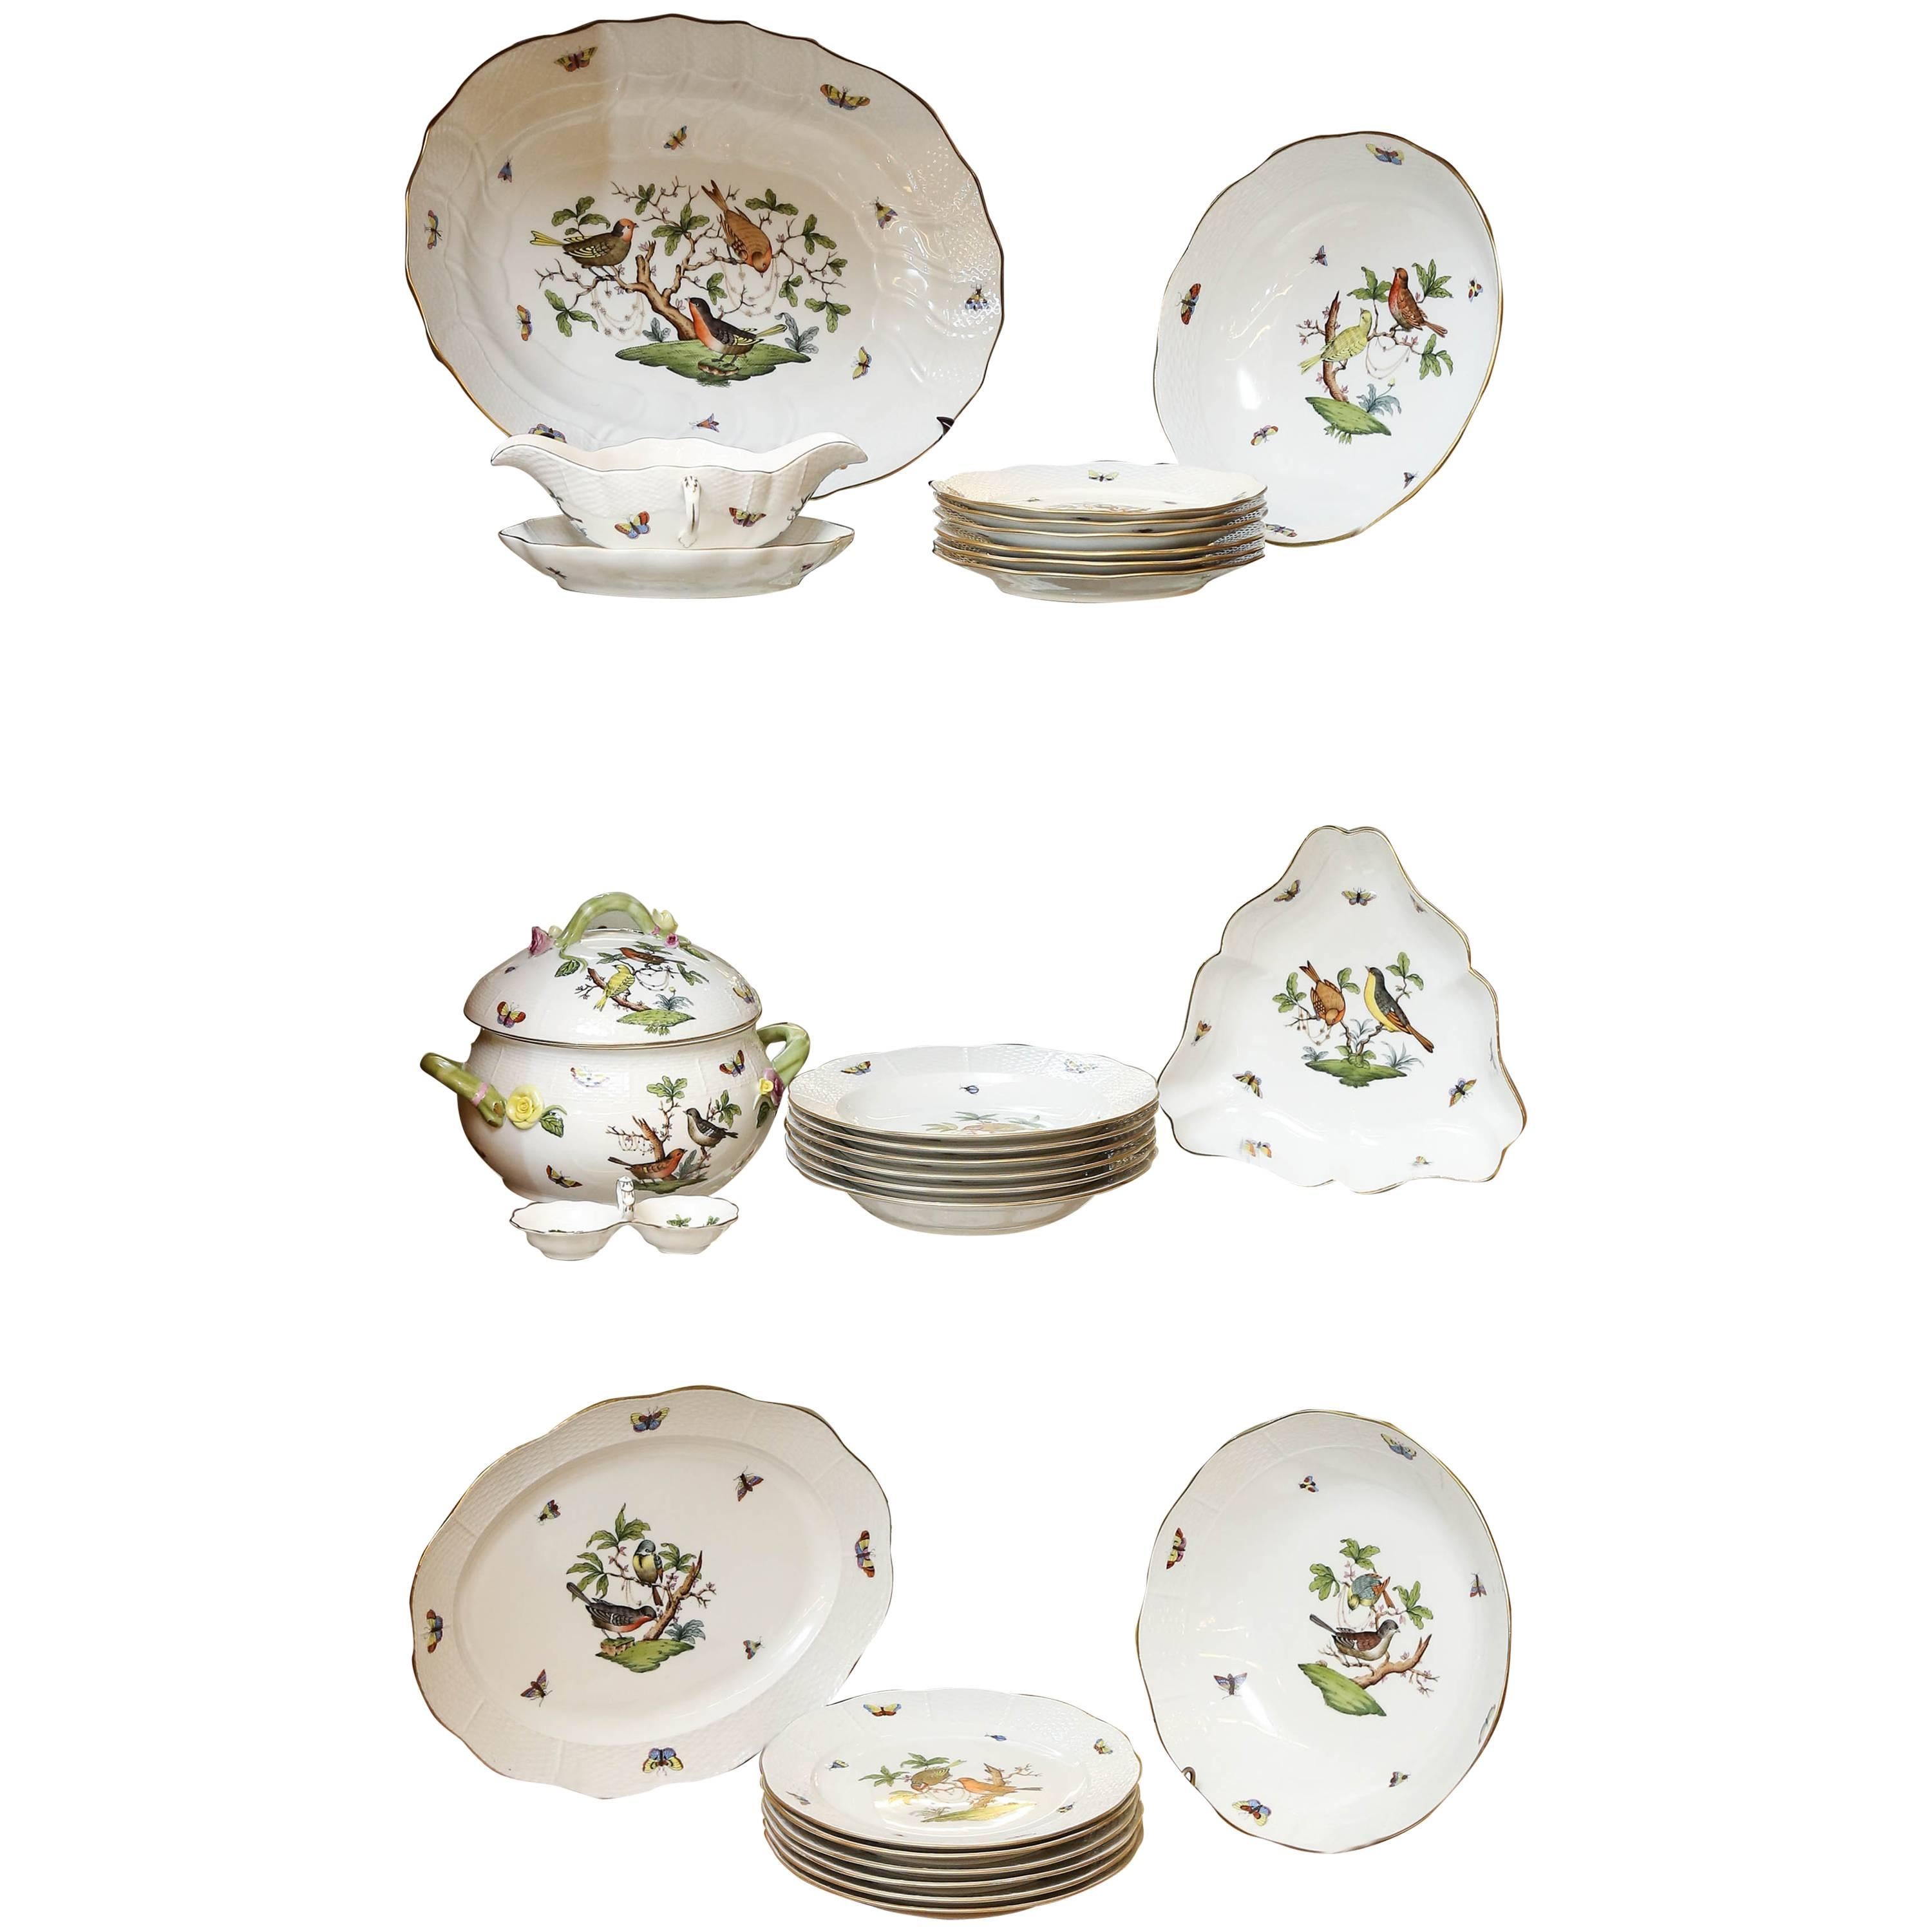 Hungarian 27 Pieces Rothschild Porcelain Hand-Painted Dinnerware Set